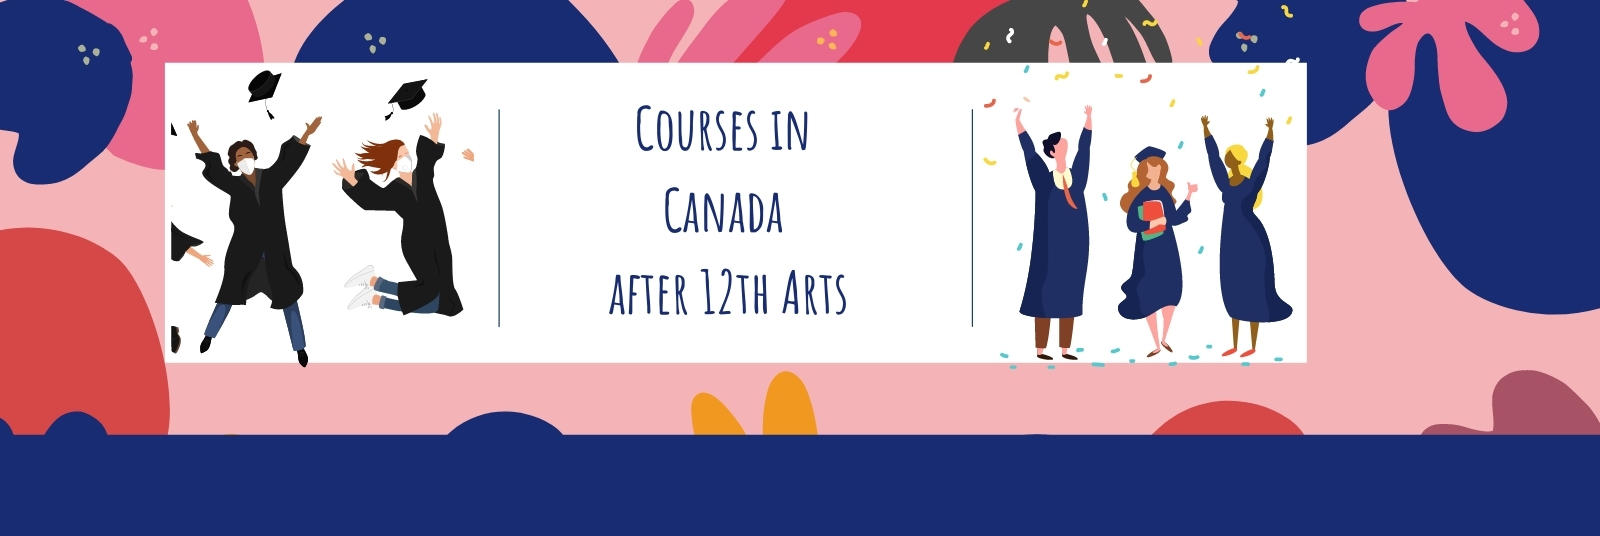 Courses in Canada after 12th arts - Preferred by Indian students